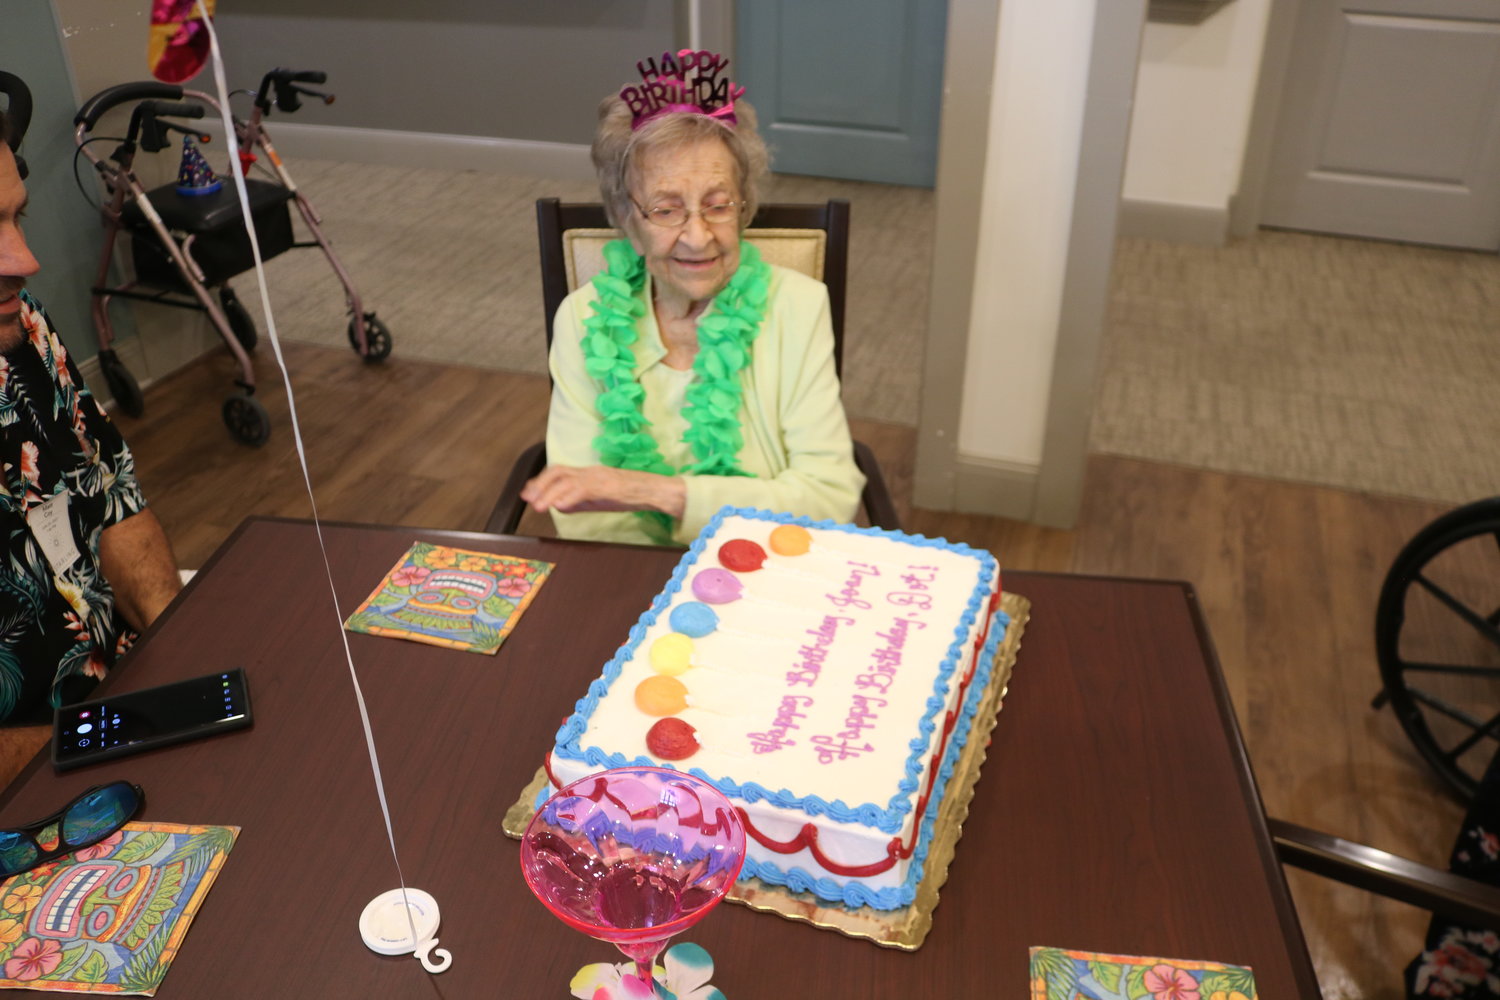 Dorothy Coy looks at the birthday cake she shared with another resident of Starling at Nocatee Assisted Living & Memory Care on June 25.